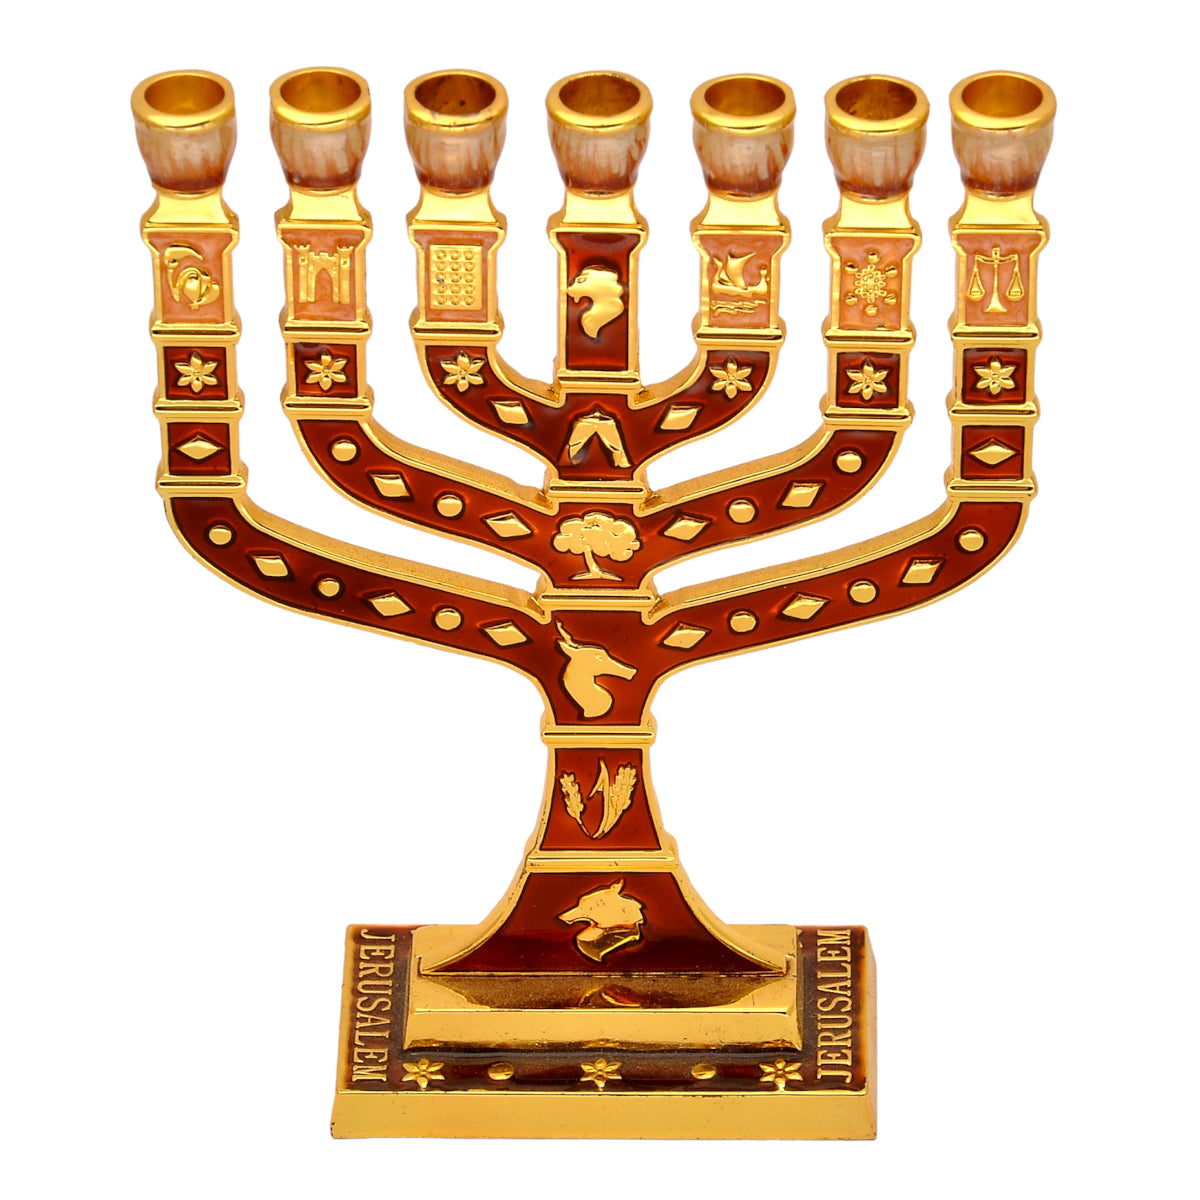 Jerusalem red & Gold Menorah Enamel Decorative Judaica Candle Holder 7 Branch with The Tribes Israel Jewish Made in Israel